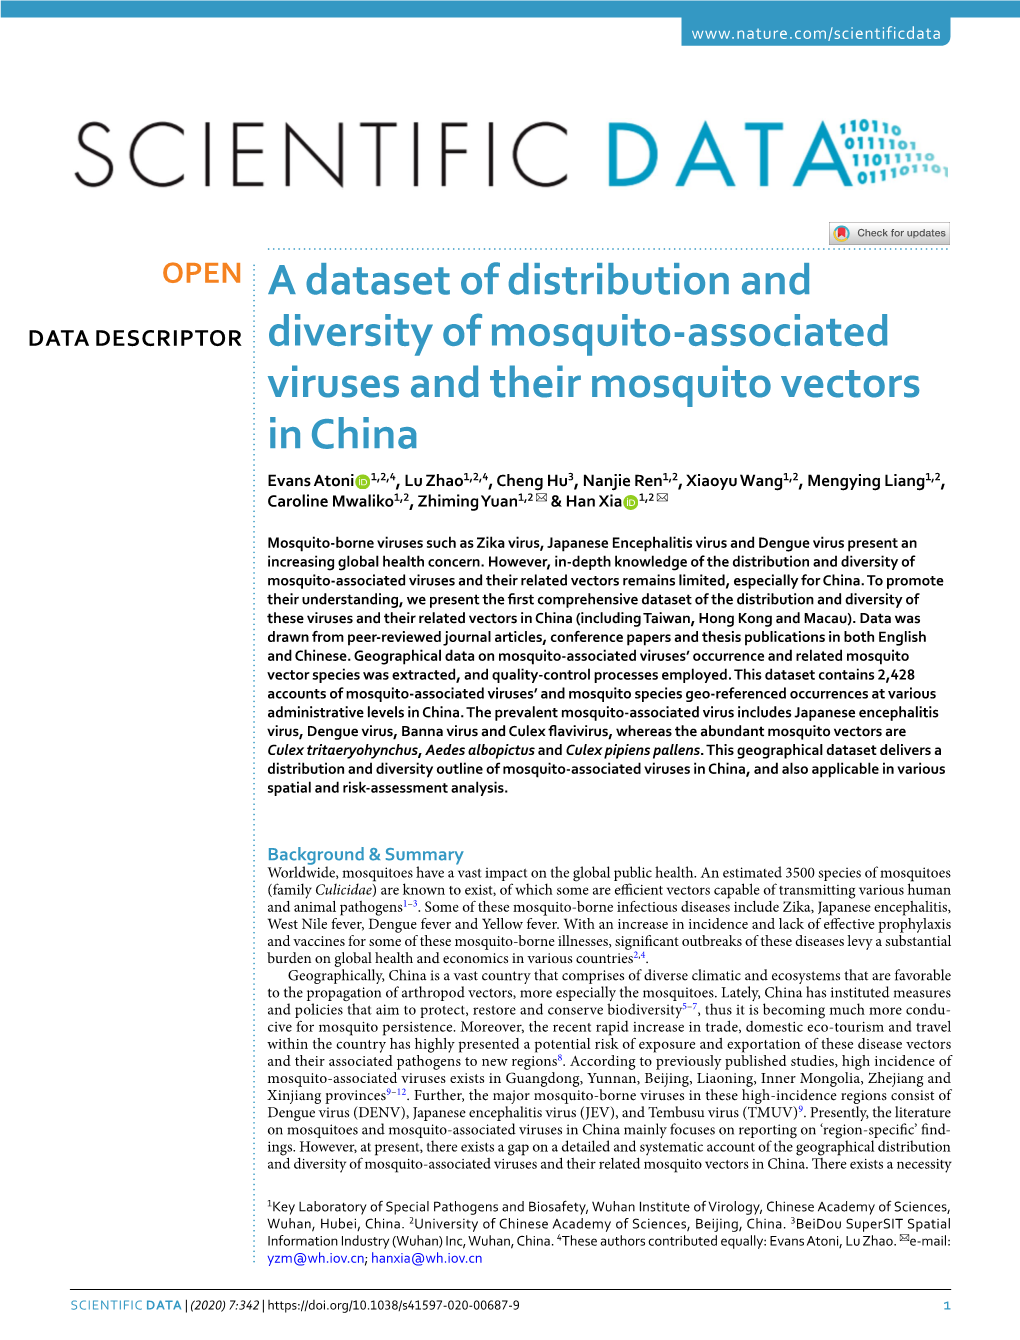 A Dataset of Distribution and Diversity of Mosquito-Associated Viruses and Teir Related Mosquito Vectors in China